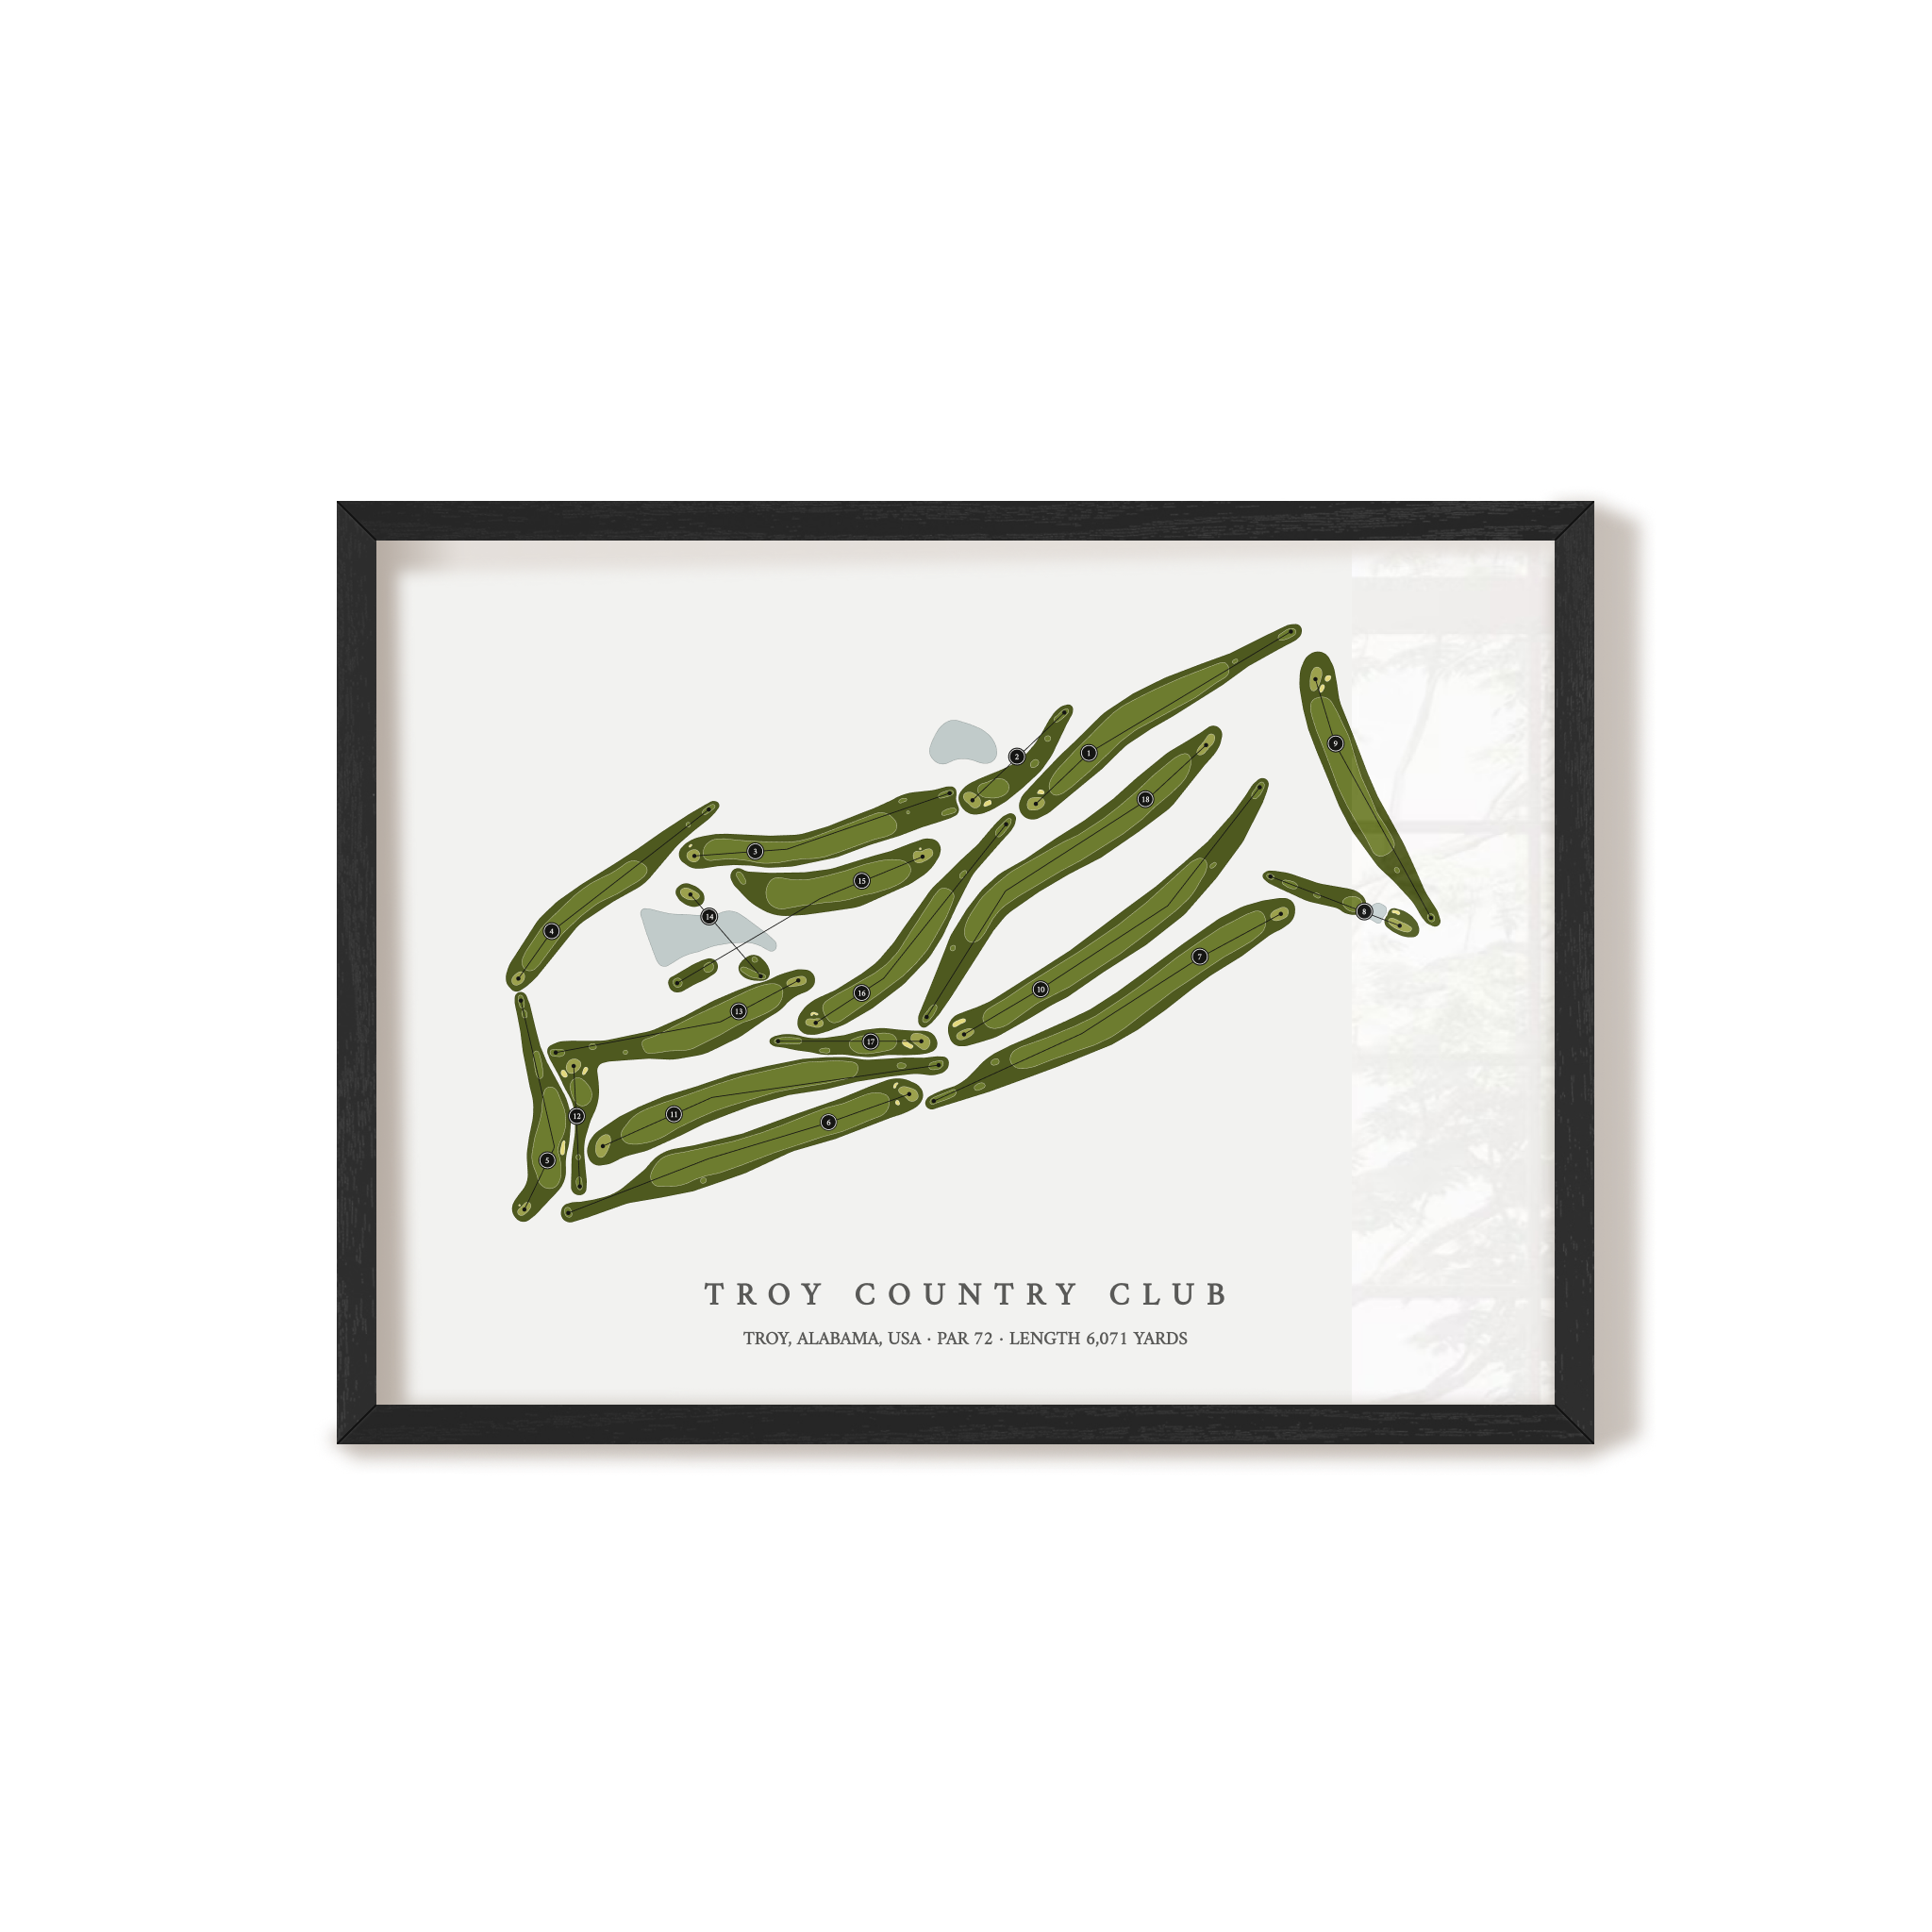 Troy Country Club | Golf Course Map | Black Frame 